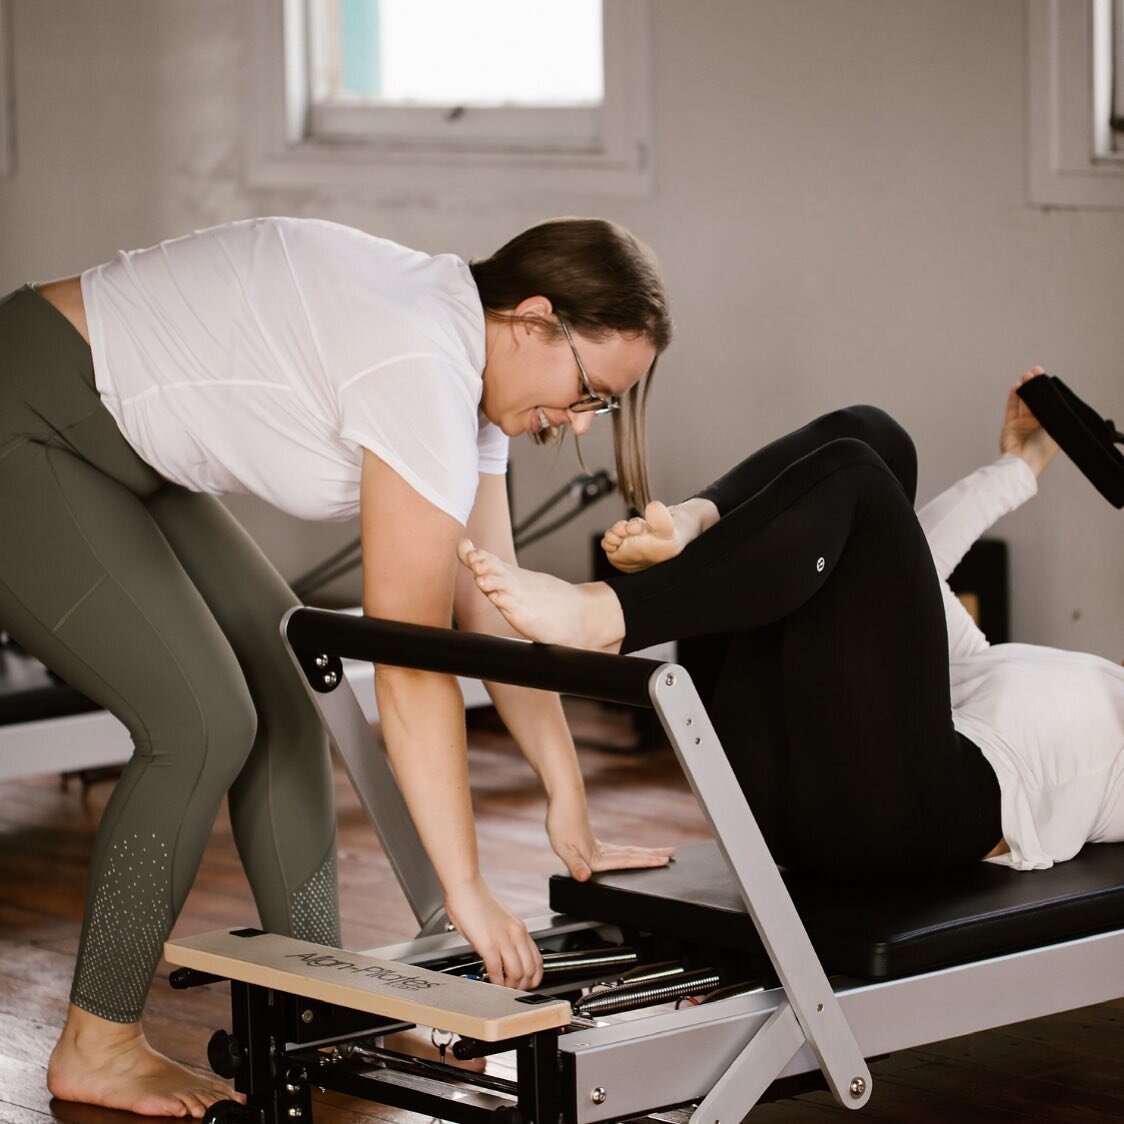 New Foundation Course starts Next Week!

We&rsquo;ve got some spaces free on our next Foundation course, starting next Wednesday @6pm, running for 4 consecutive weeks. If you&rsquo;re keen to learn reformer pilates then this is the course for you🙋&z